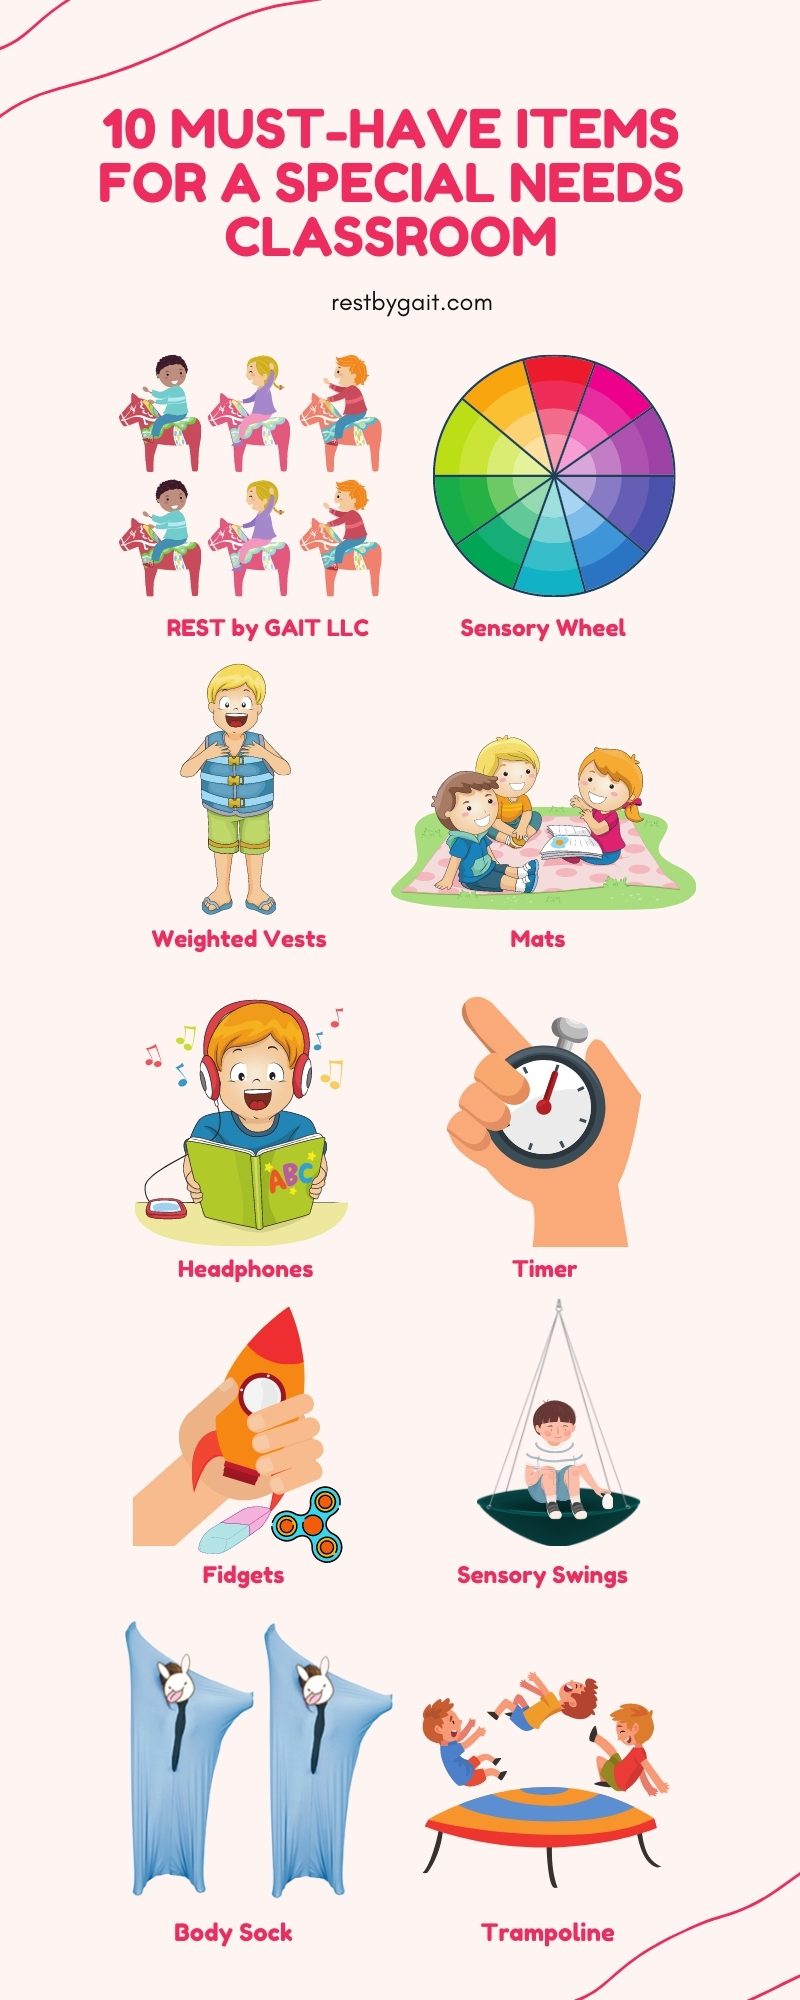 10 Must-Have Items for A Special Needs Classroom Infographic